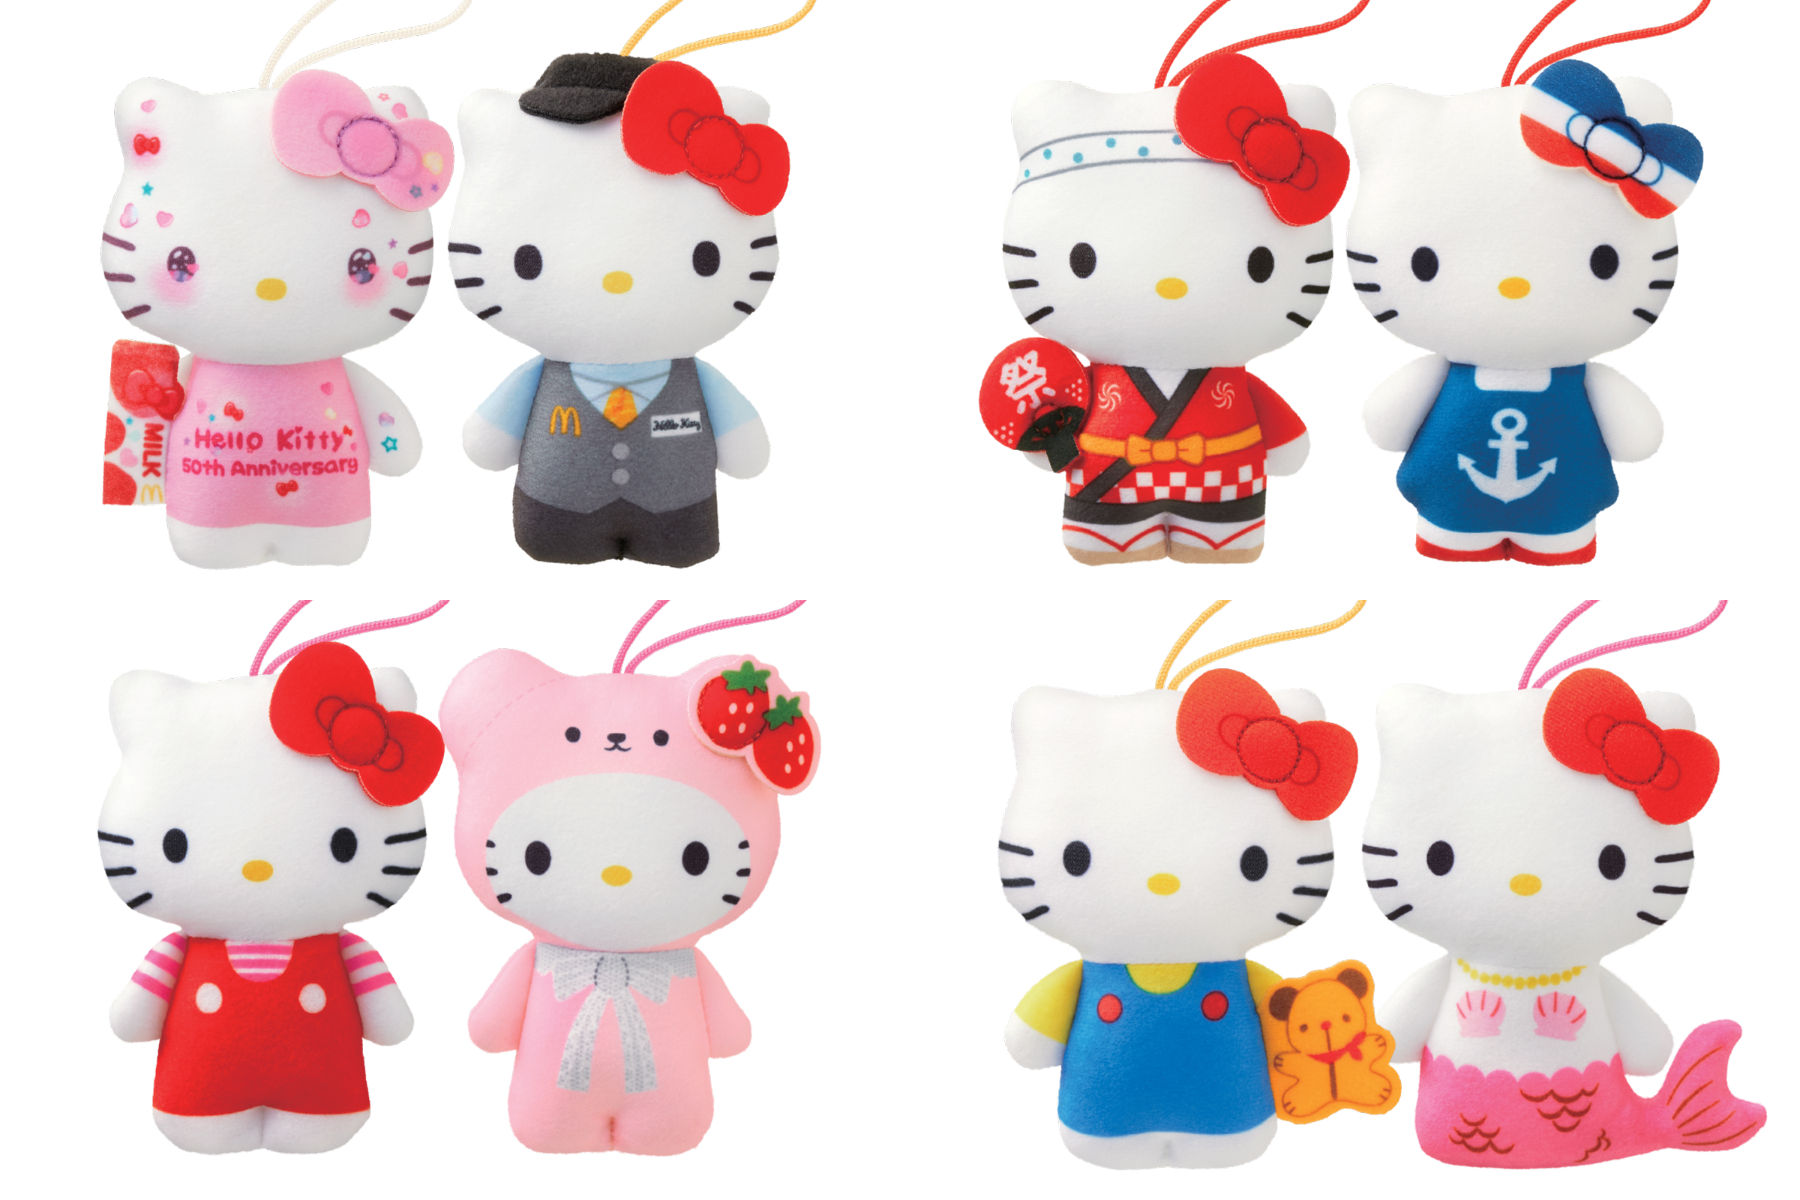 HELLO KITTY - 16 PLUSH WITH PINK DRESS (LIMITED EDITION) - Dole Plantation